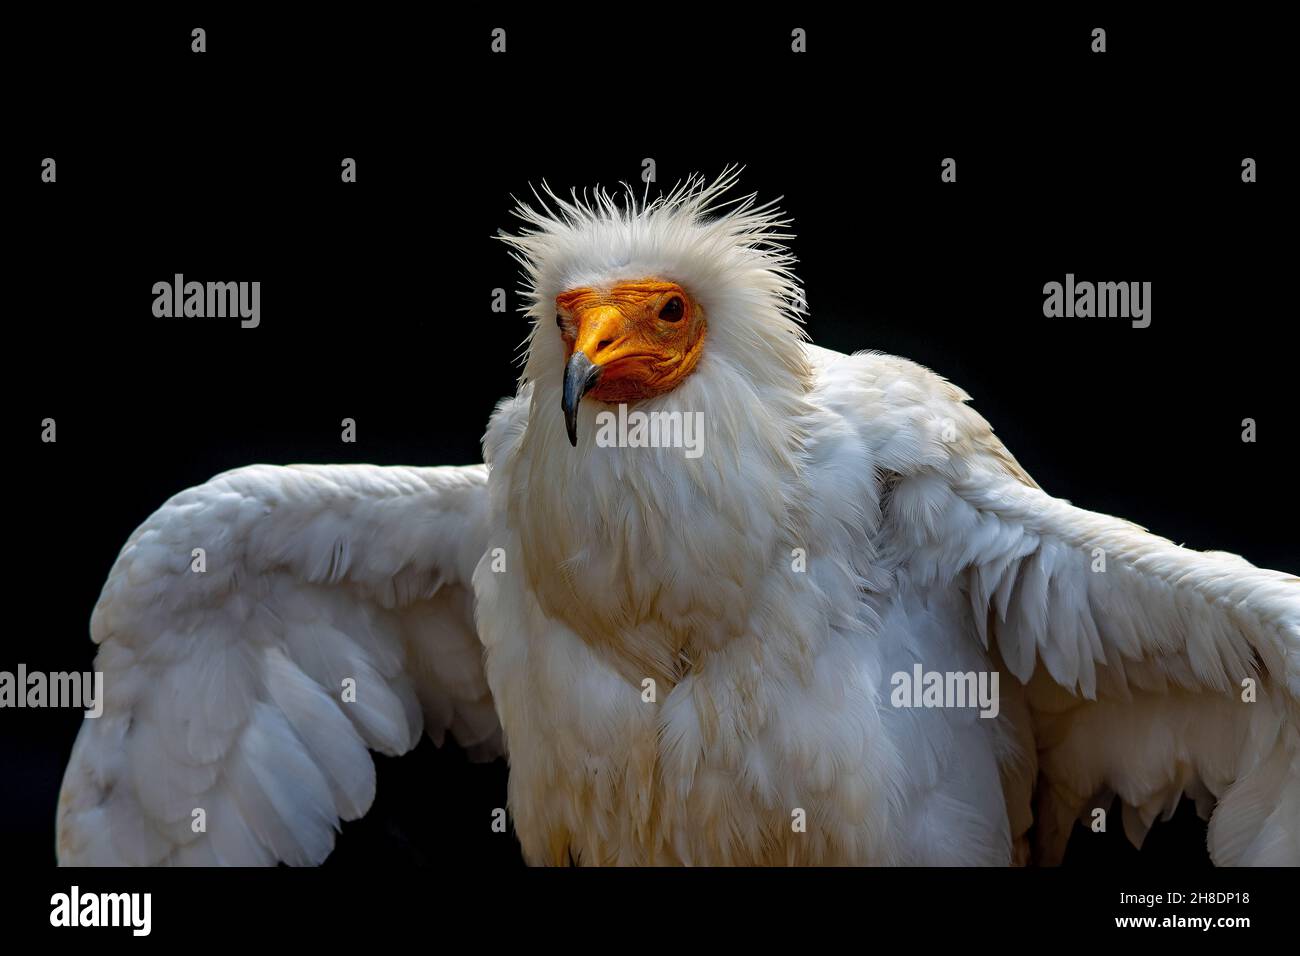 Neophron percnopterus - The Egyptian vulture, abanto, guirre or Egyptian vulture is a species of accipitriform bird of the Accipitridae family. Stock Photo